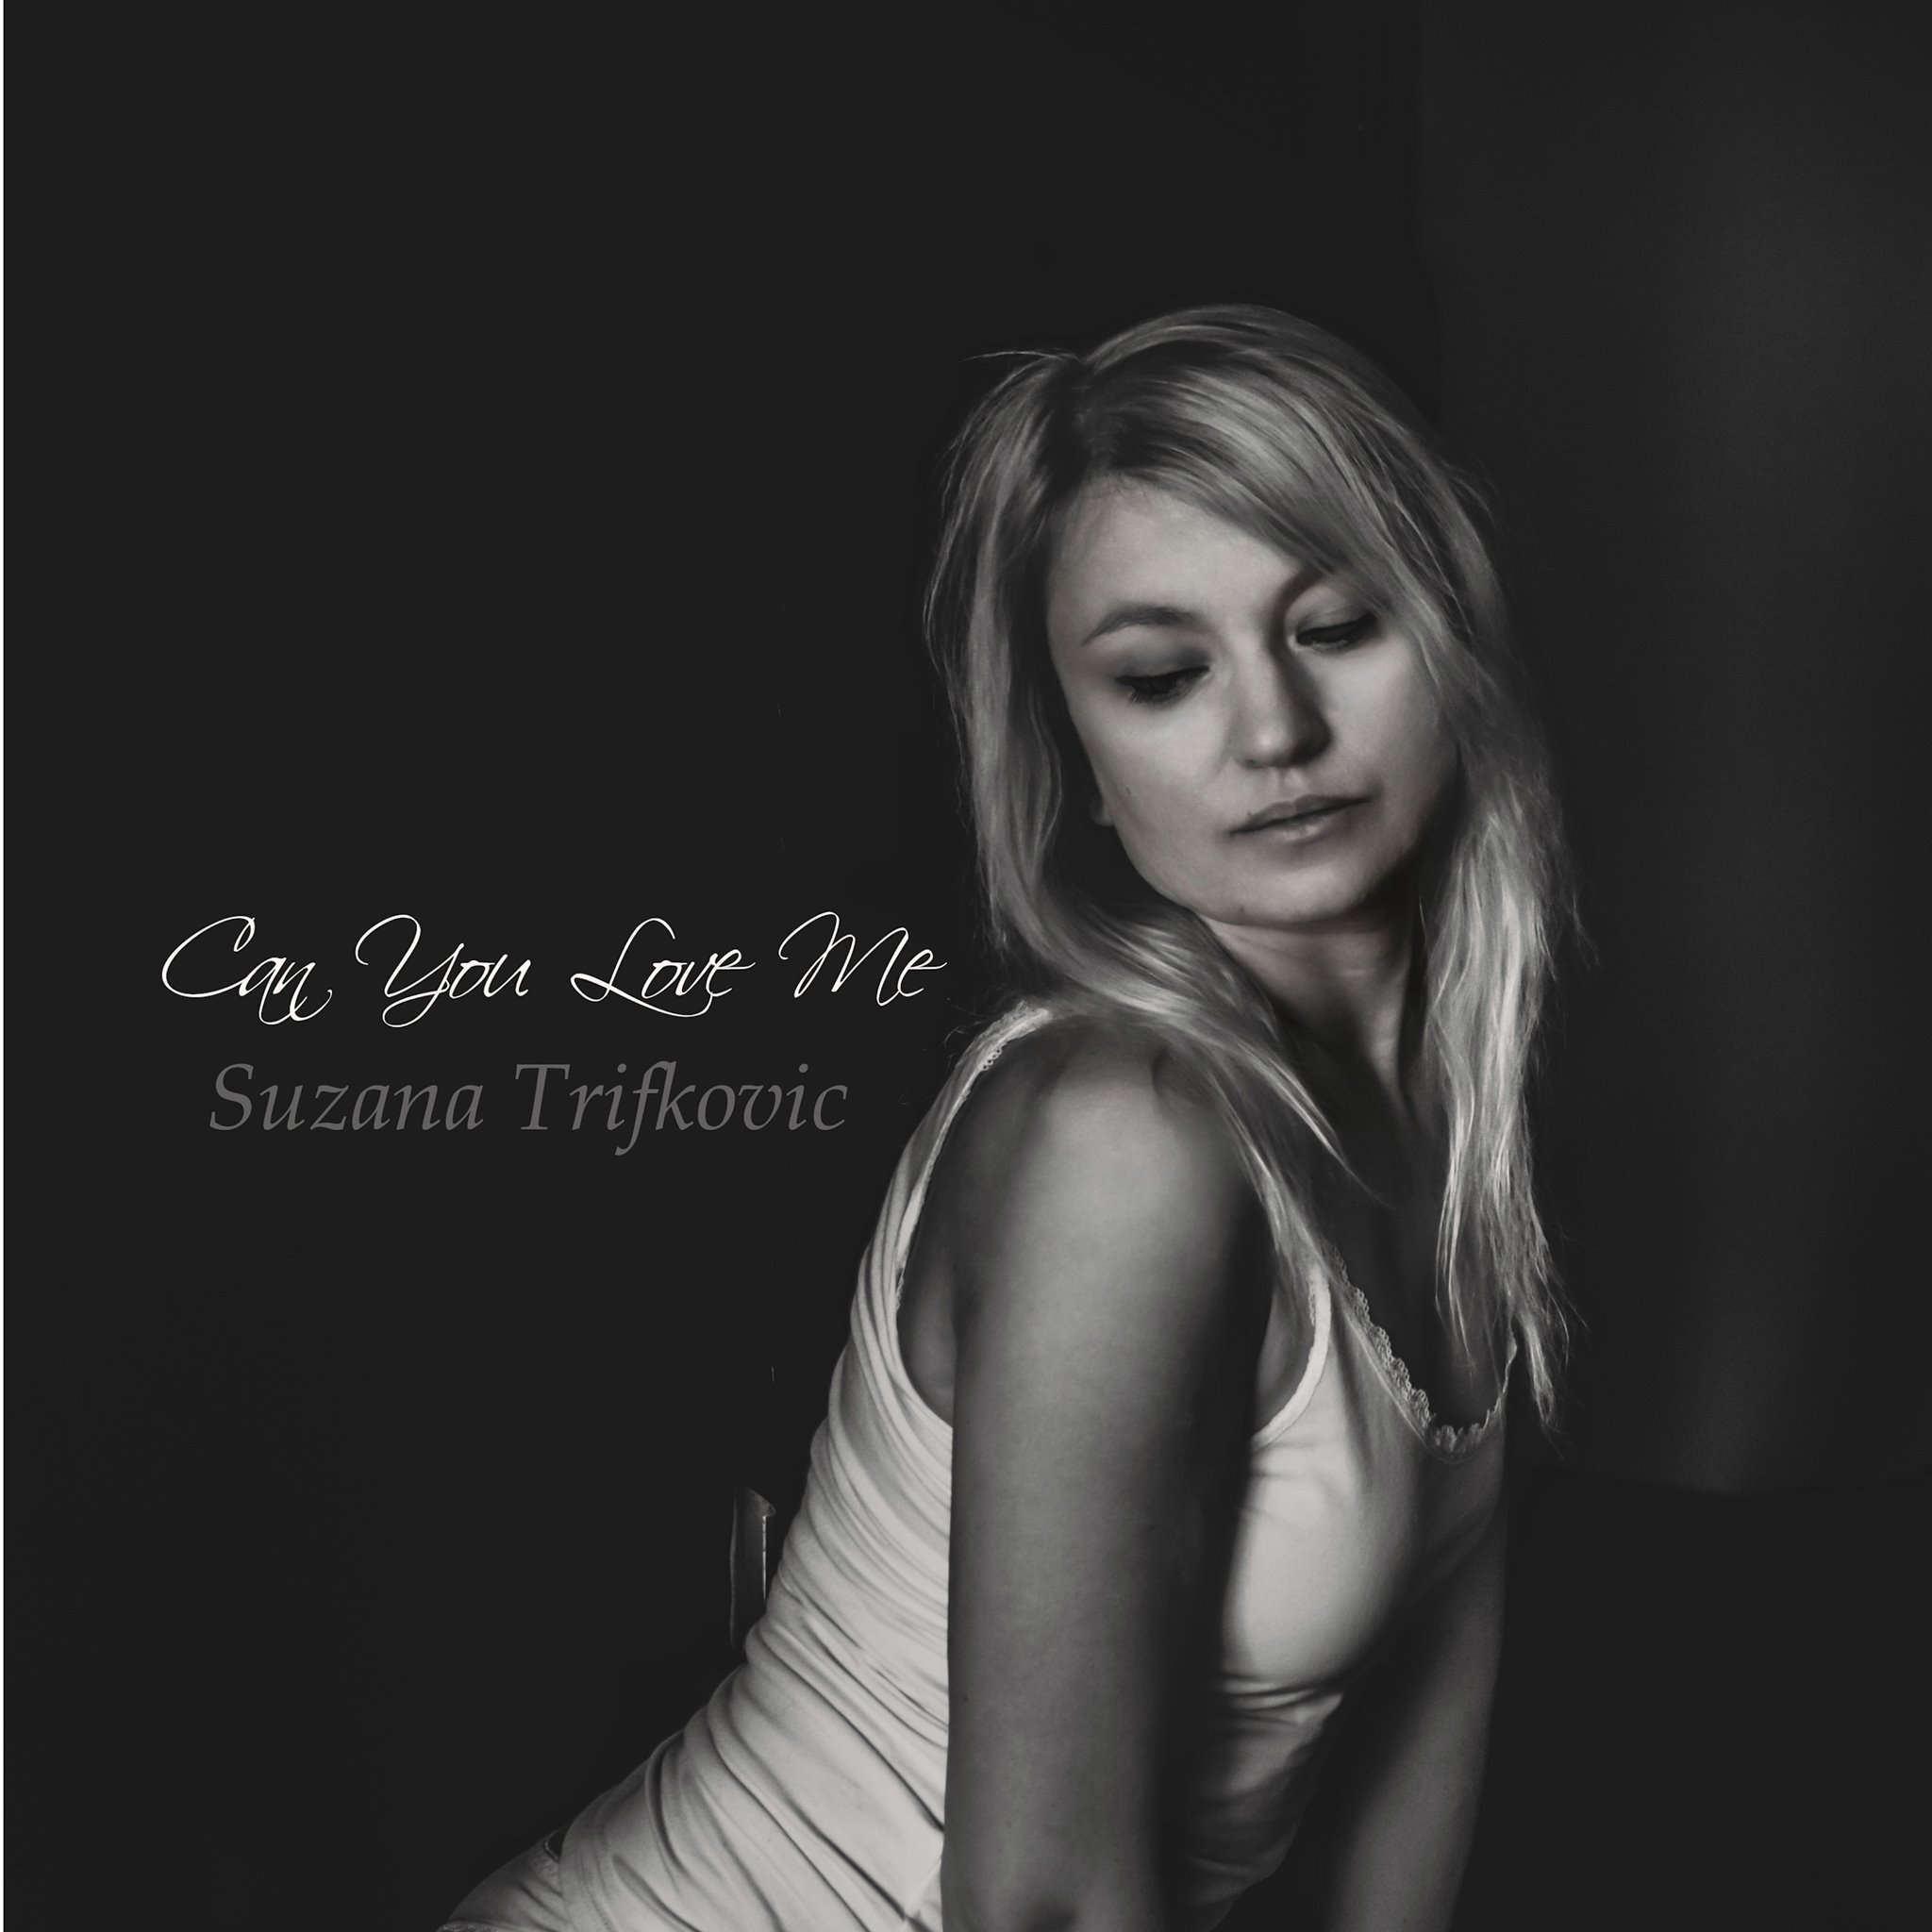 Suzana Trifkovic Releases Ear-catching Single "Can You Love Me"